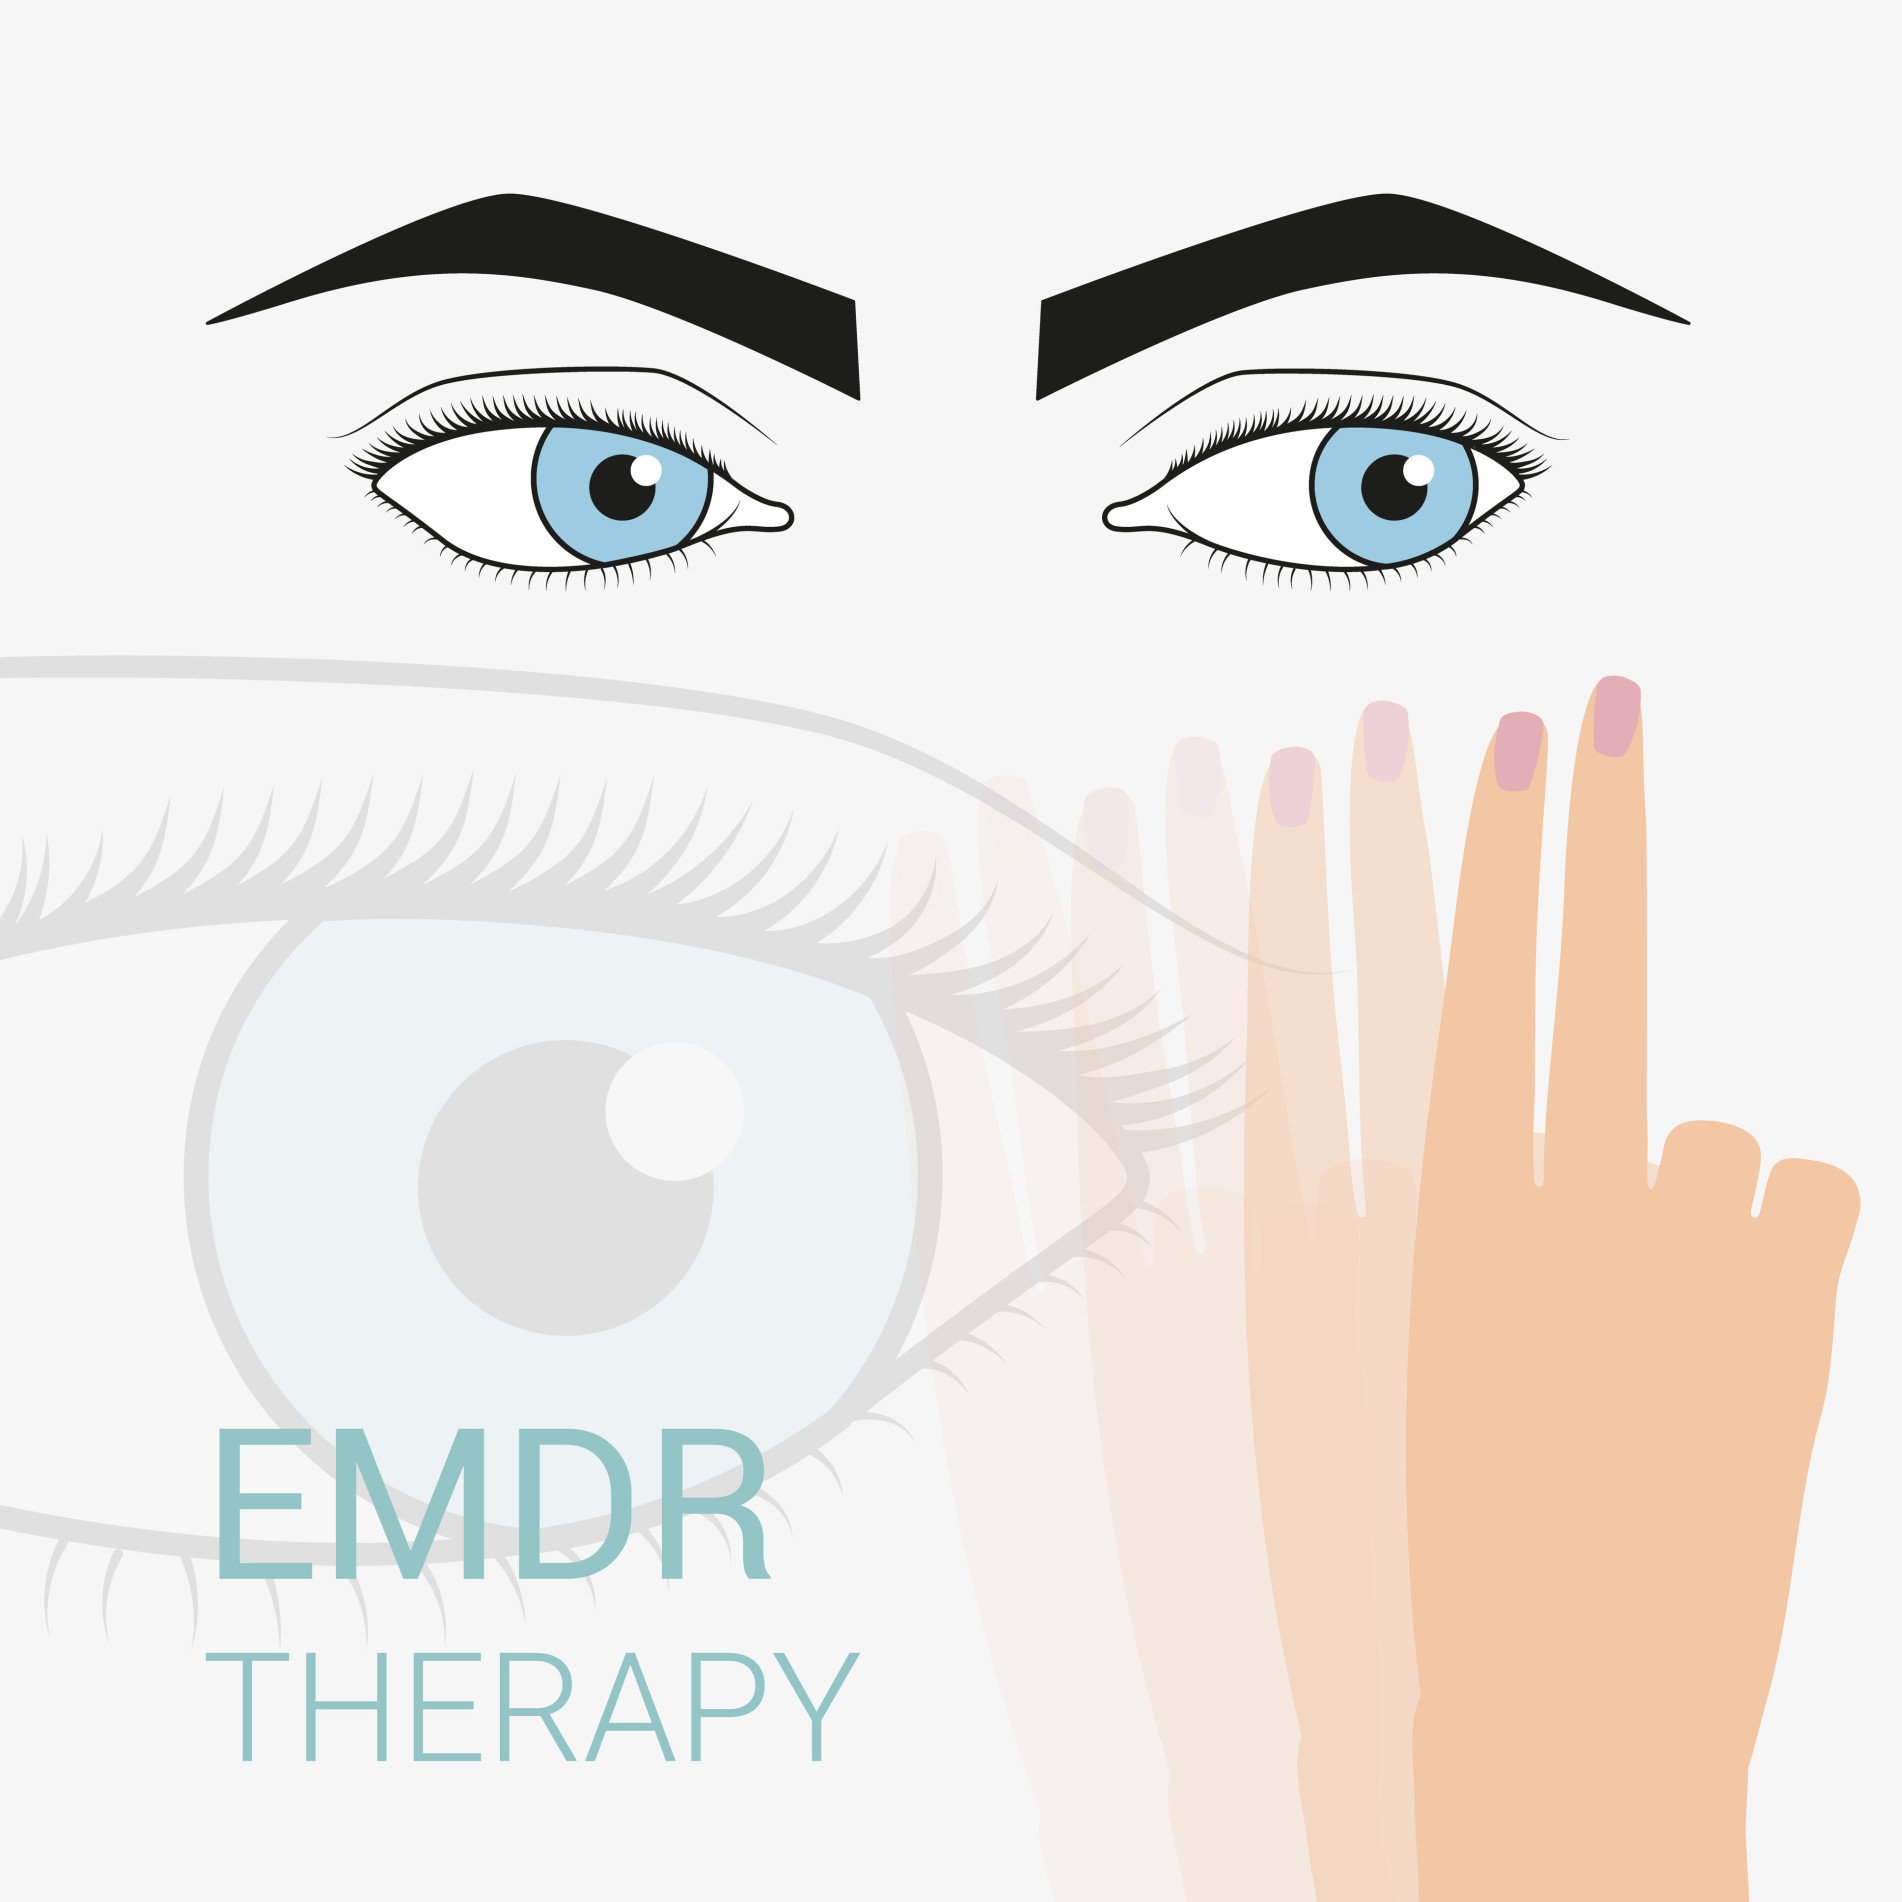 Psychotherapy and psychology. Emdr therapy help with psychological problems. Sadness, longing, despondency, depression. Eye movement to the right and left.